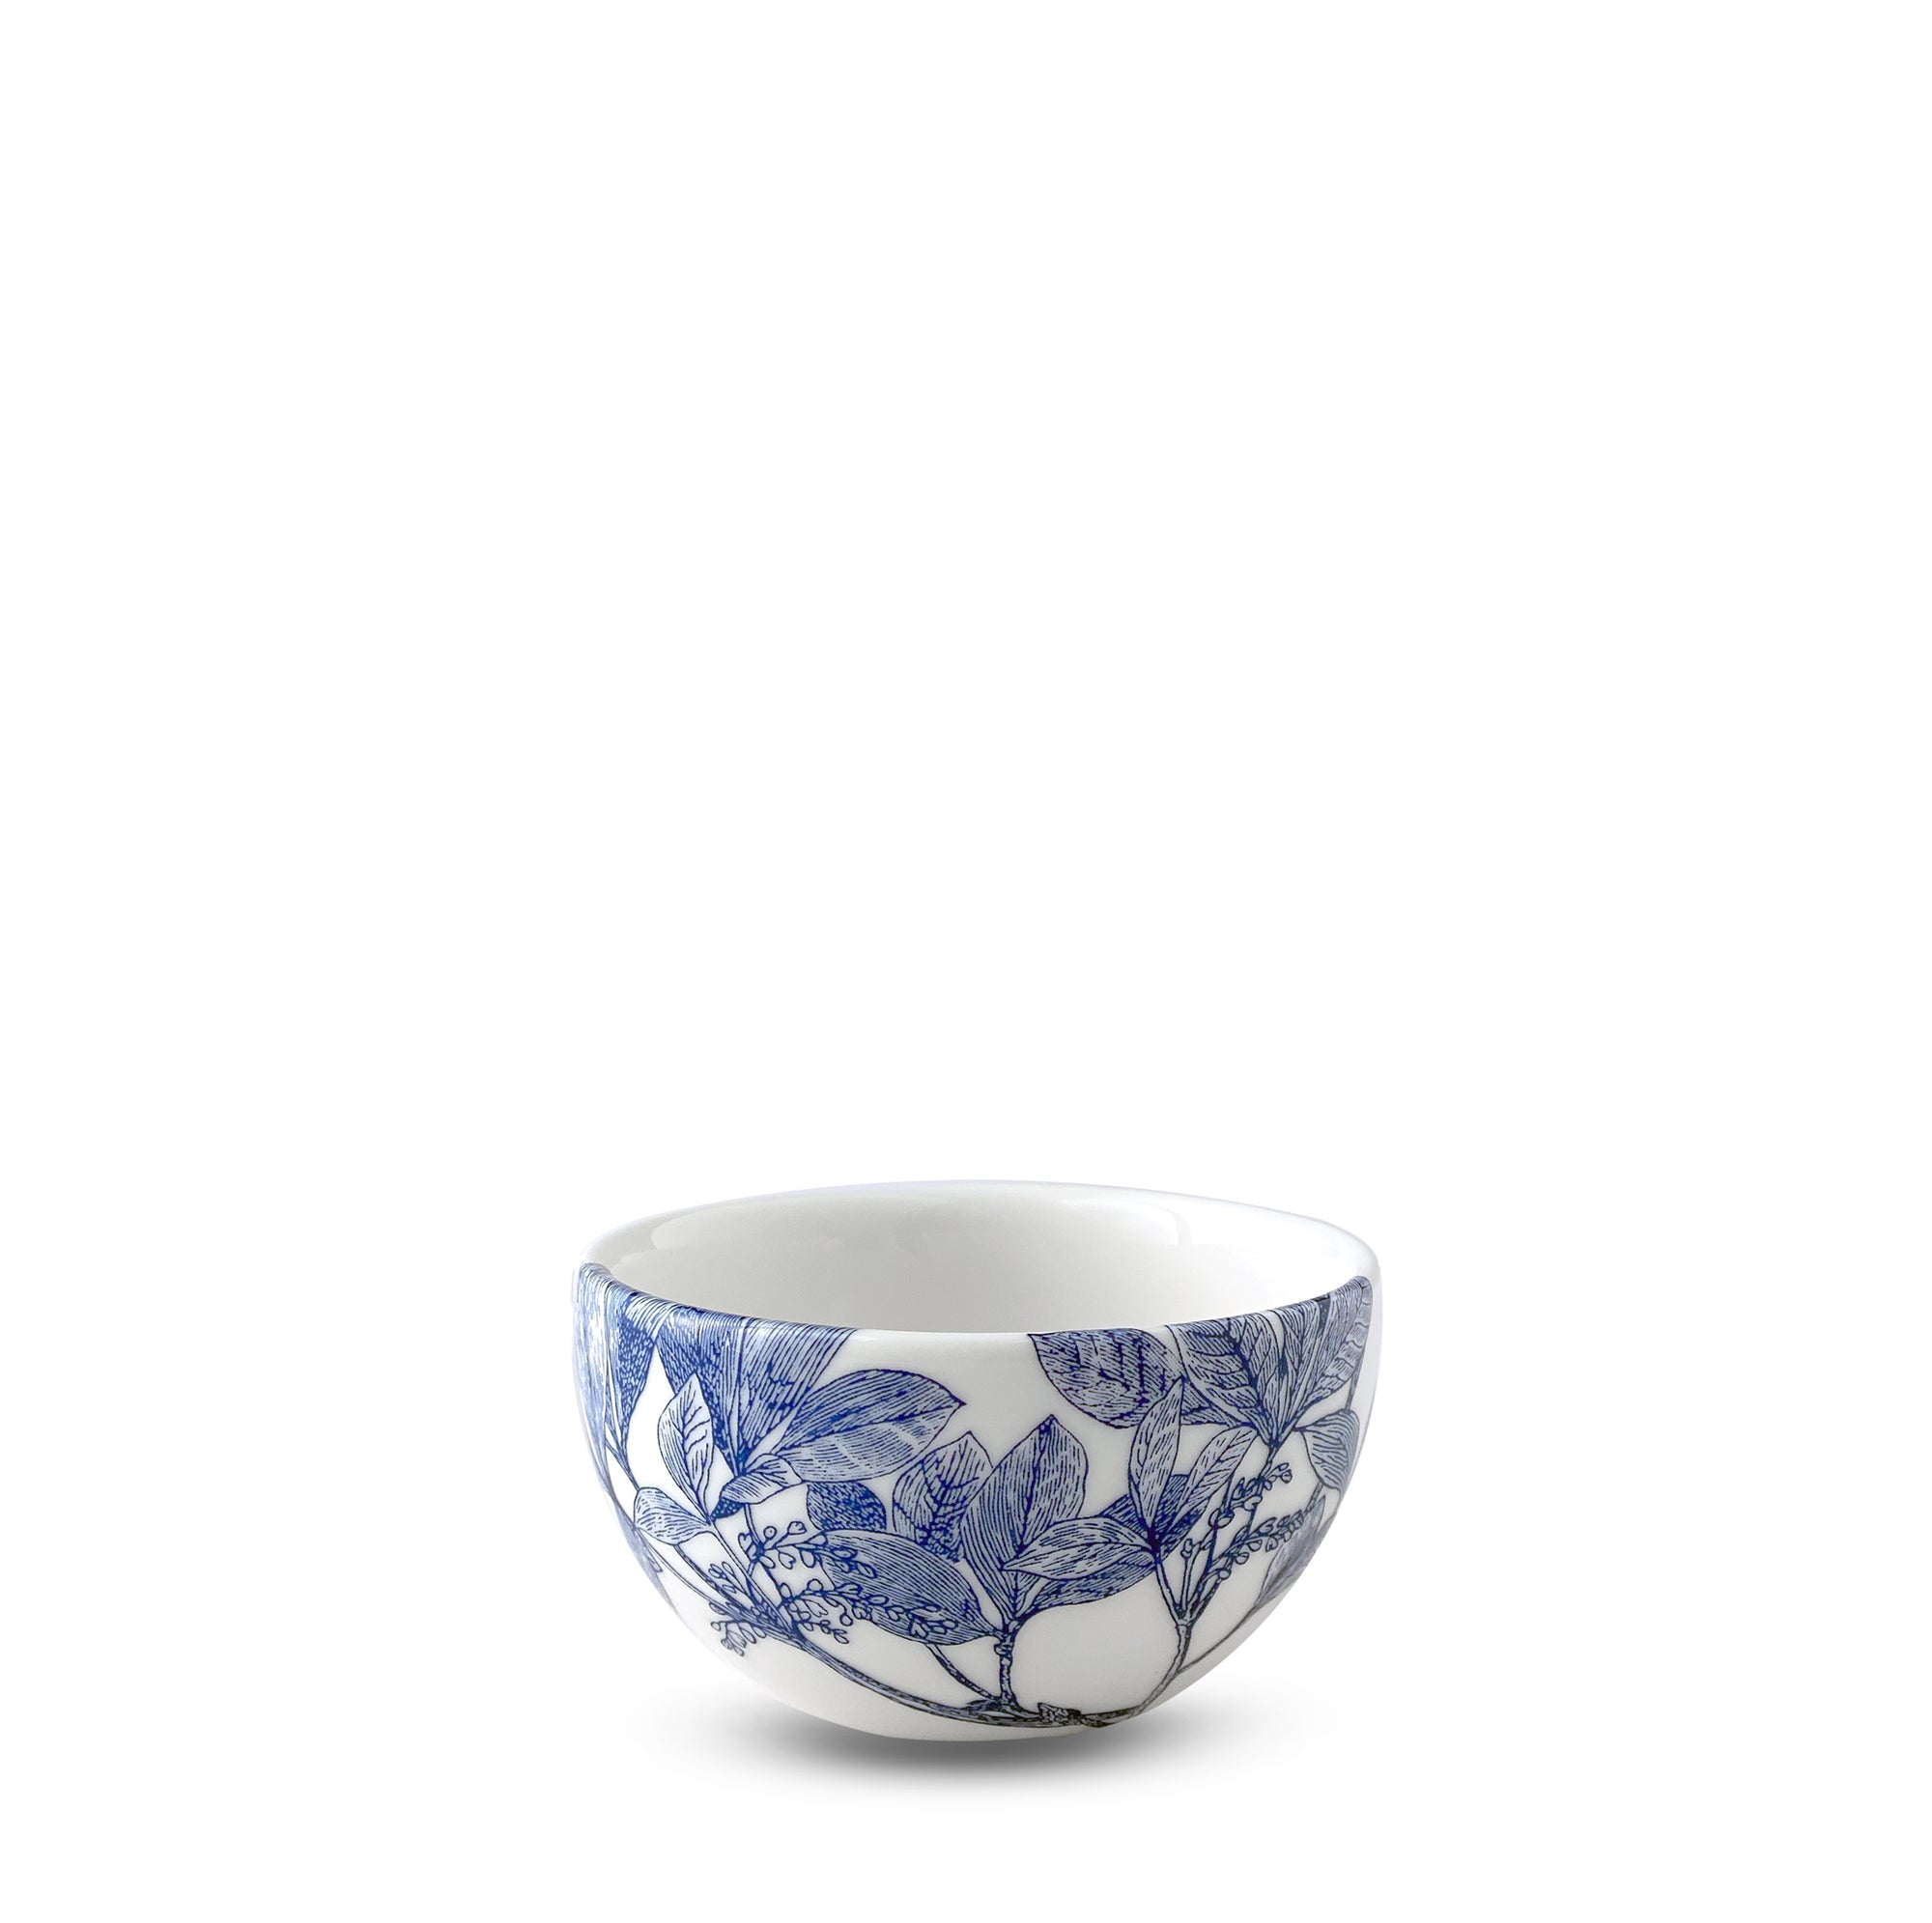 A small porcelain bowl adorned with blue floral and leafy branch patterns on a white background, both dishwasher and microwave safe. The Arbor Snack Bowl by Caskata Artisanal Home.